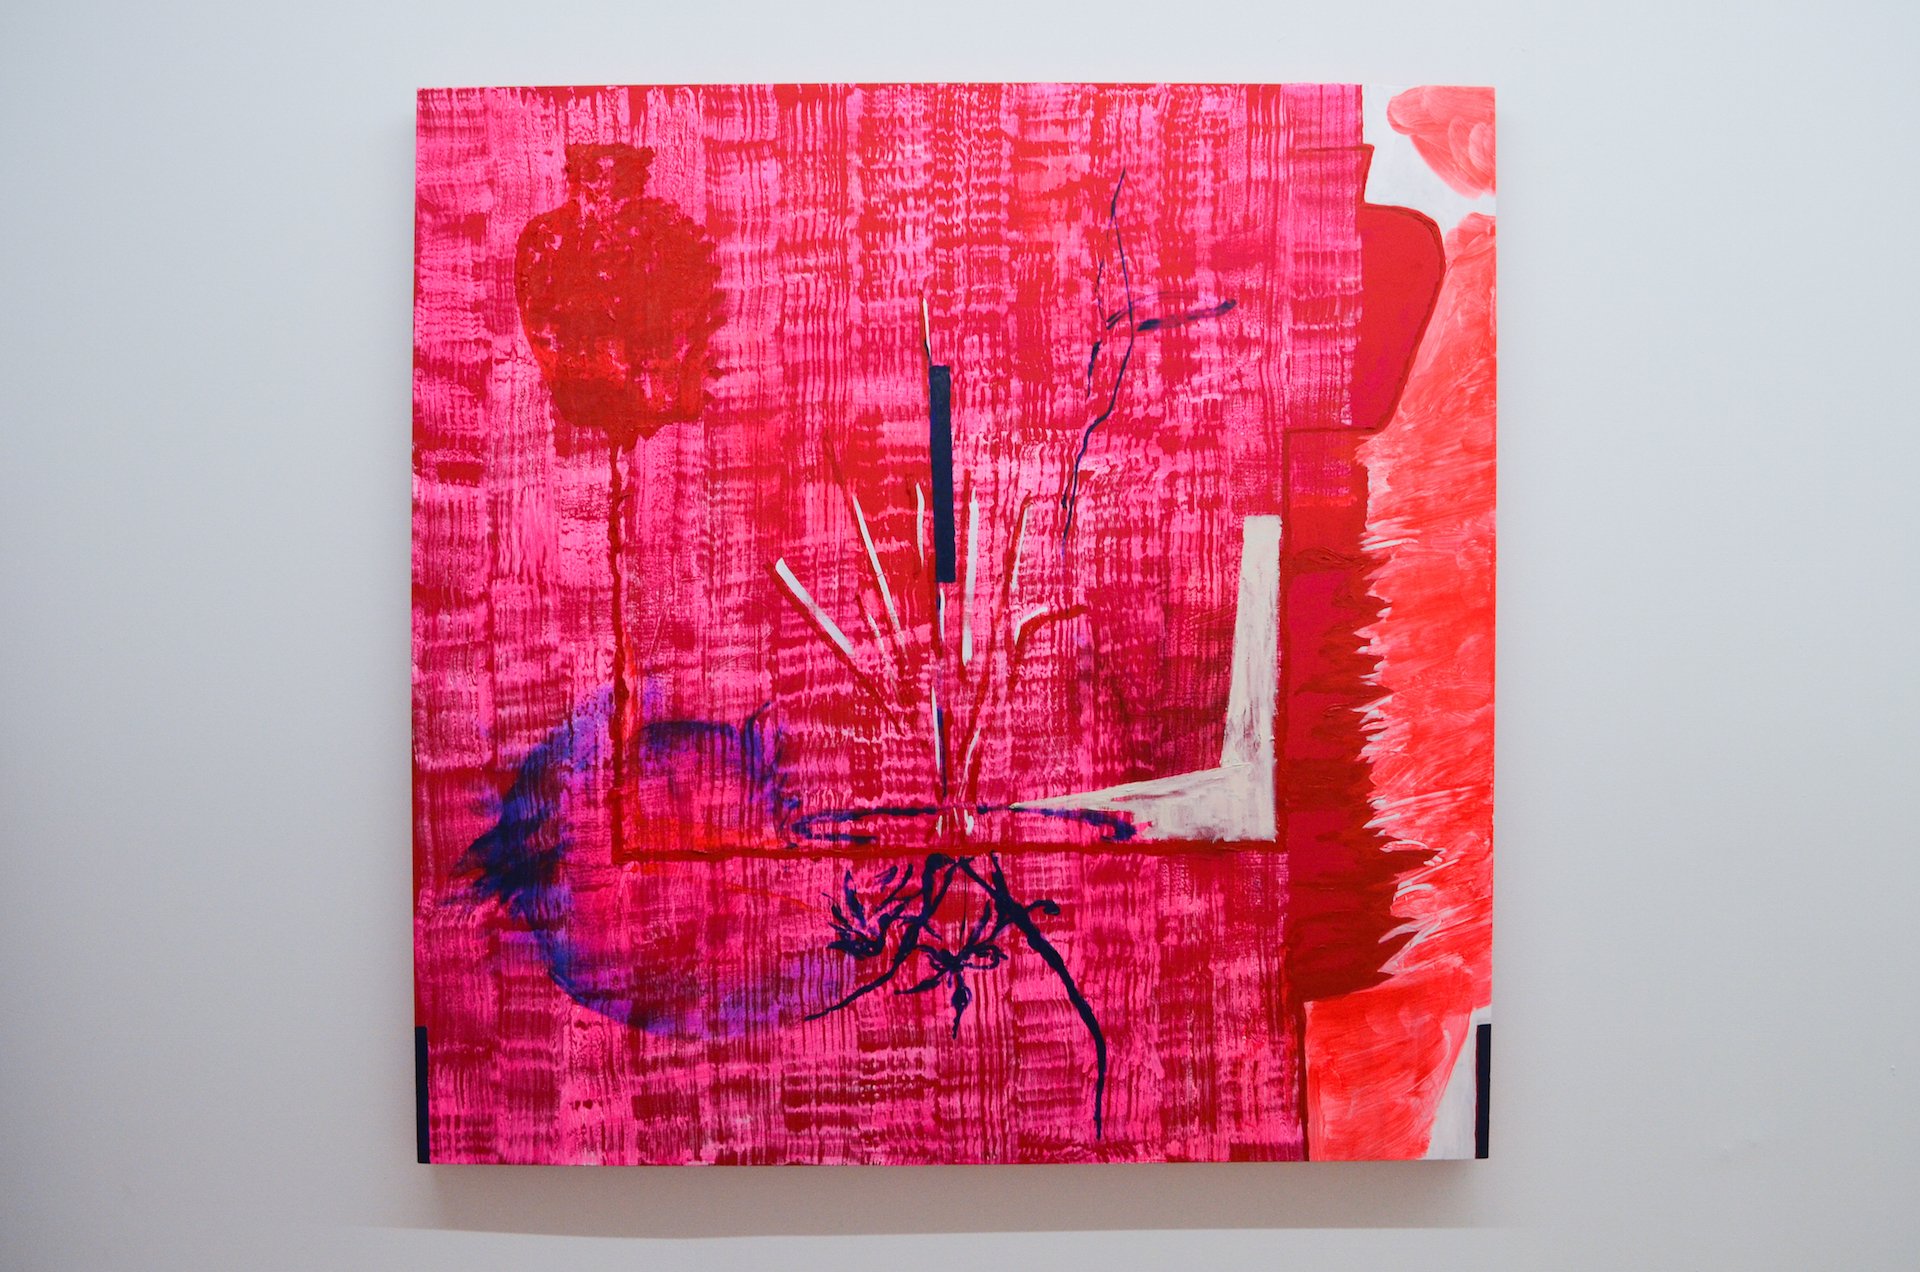  Laura Hunt,  Flowers Everywhere Except the Vase , 2015, oil, acrylic, and ink on Spandex, 48 x 48 inches. 